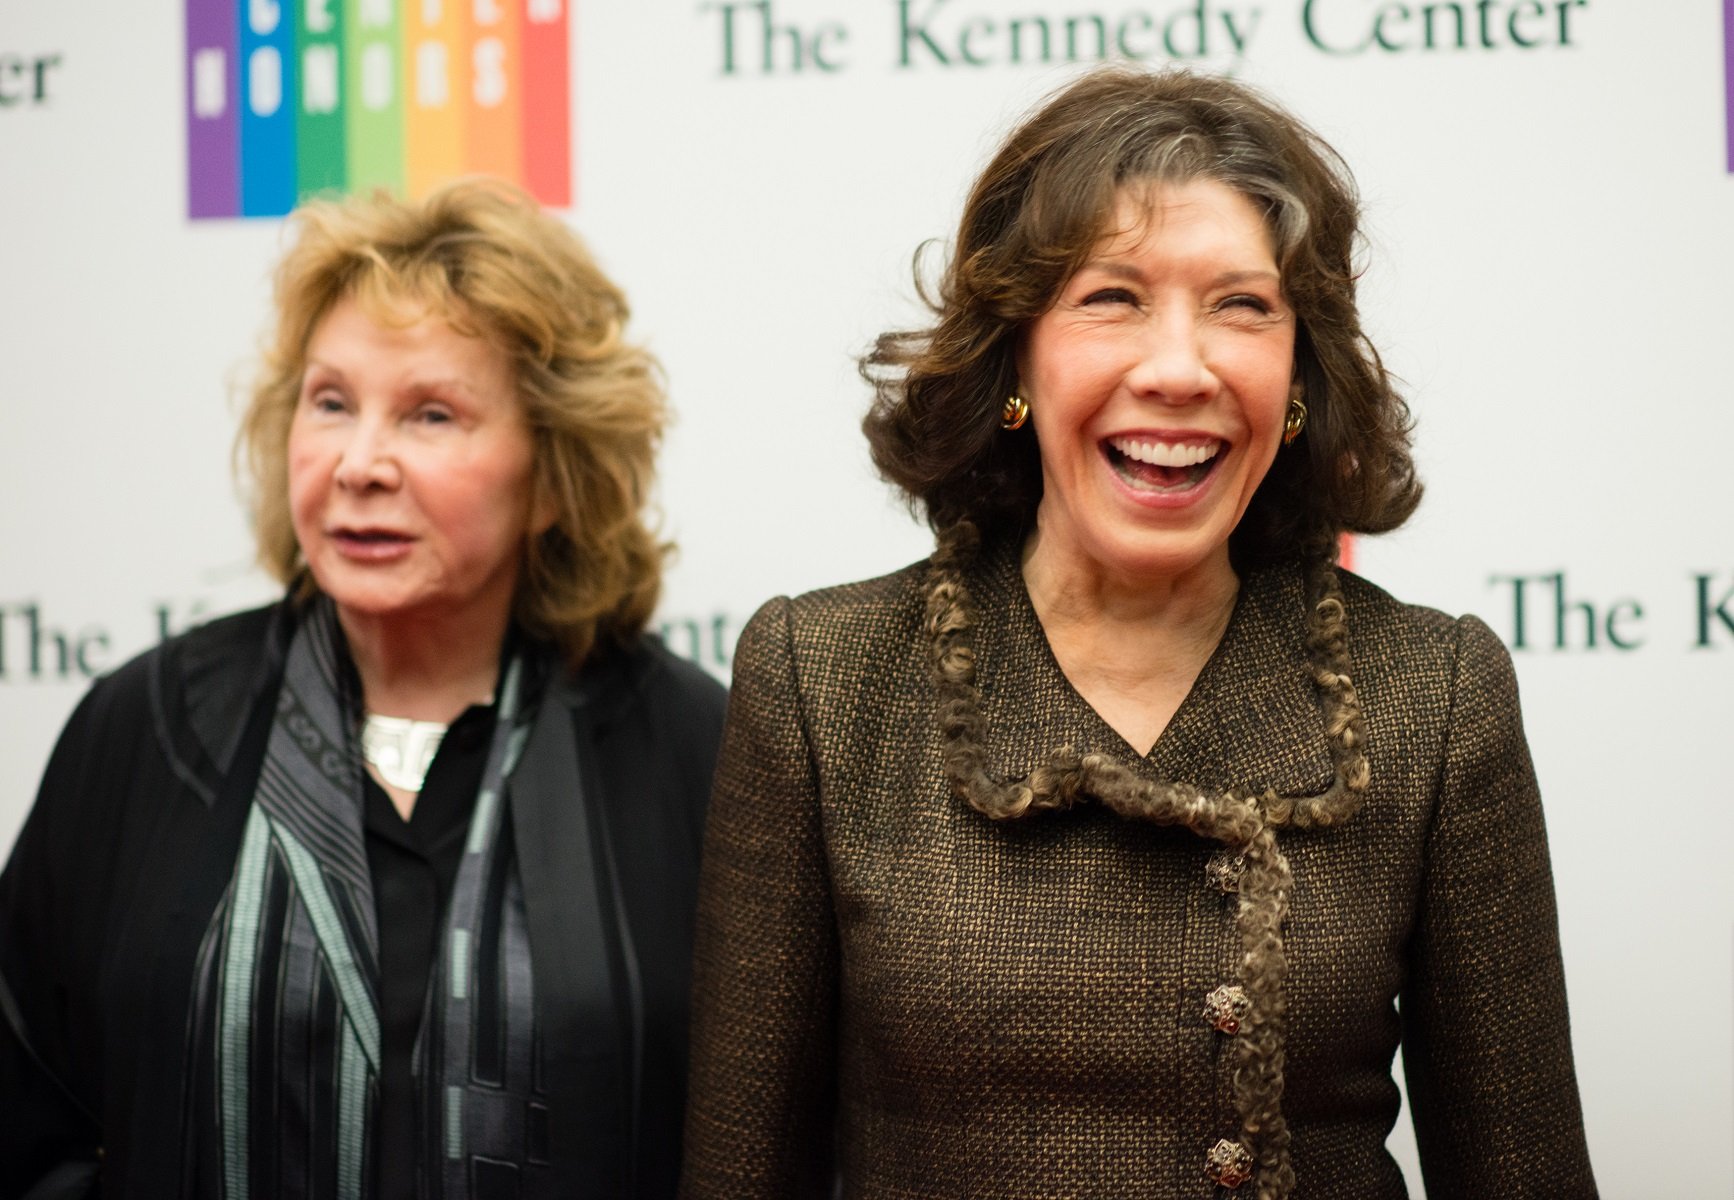 Jane Wagner and Lily Tomlin appear together at an event at the Kennedy Center